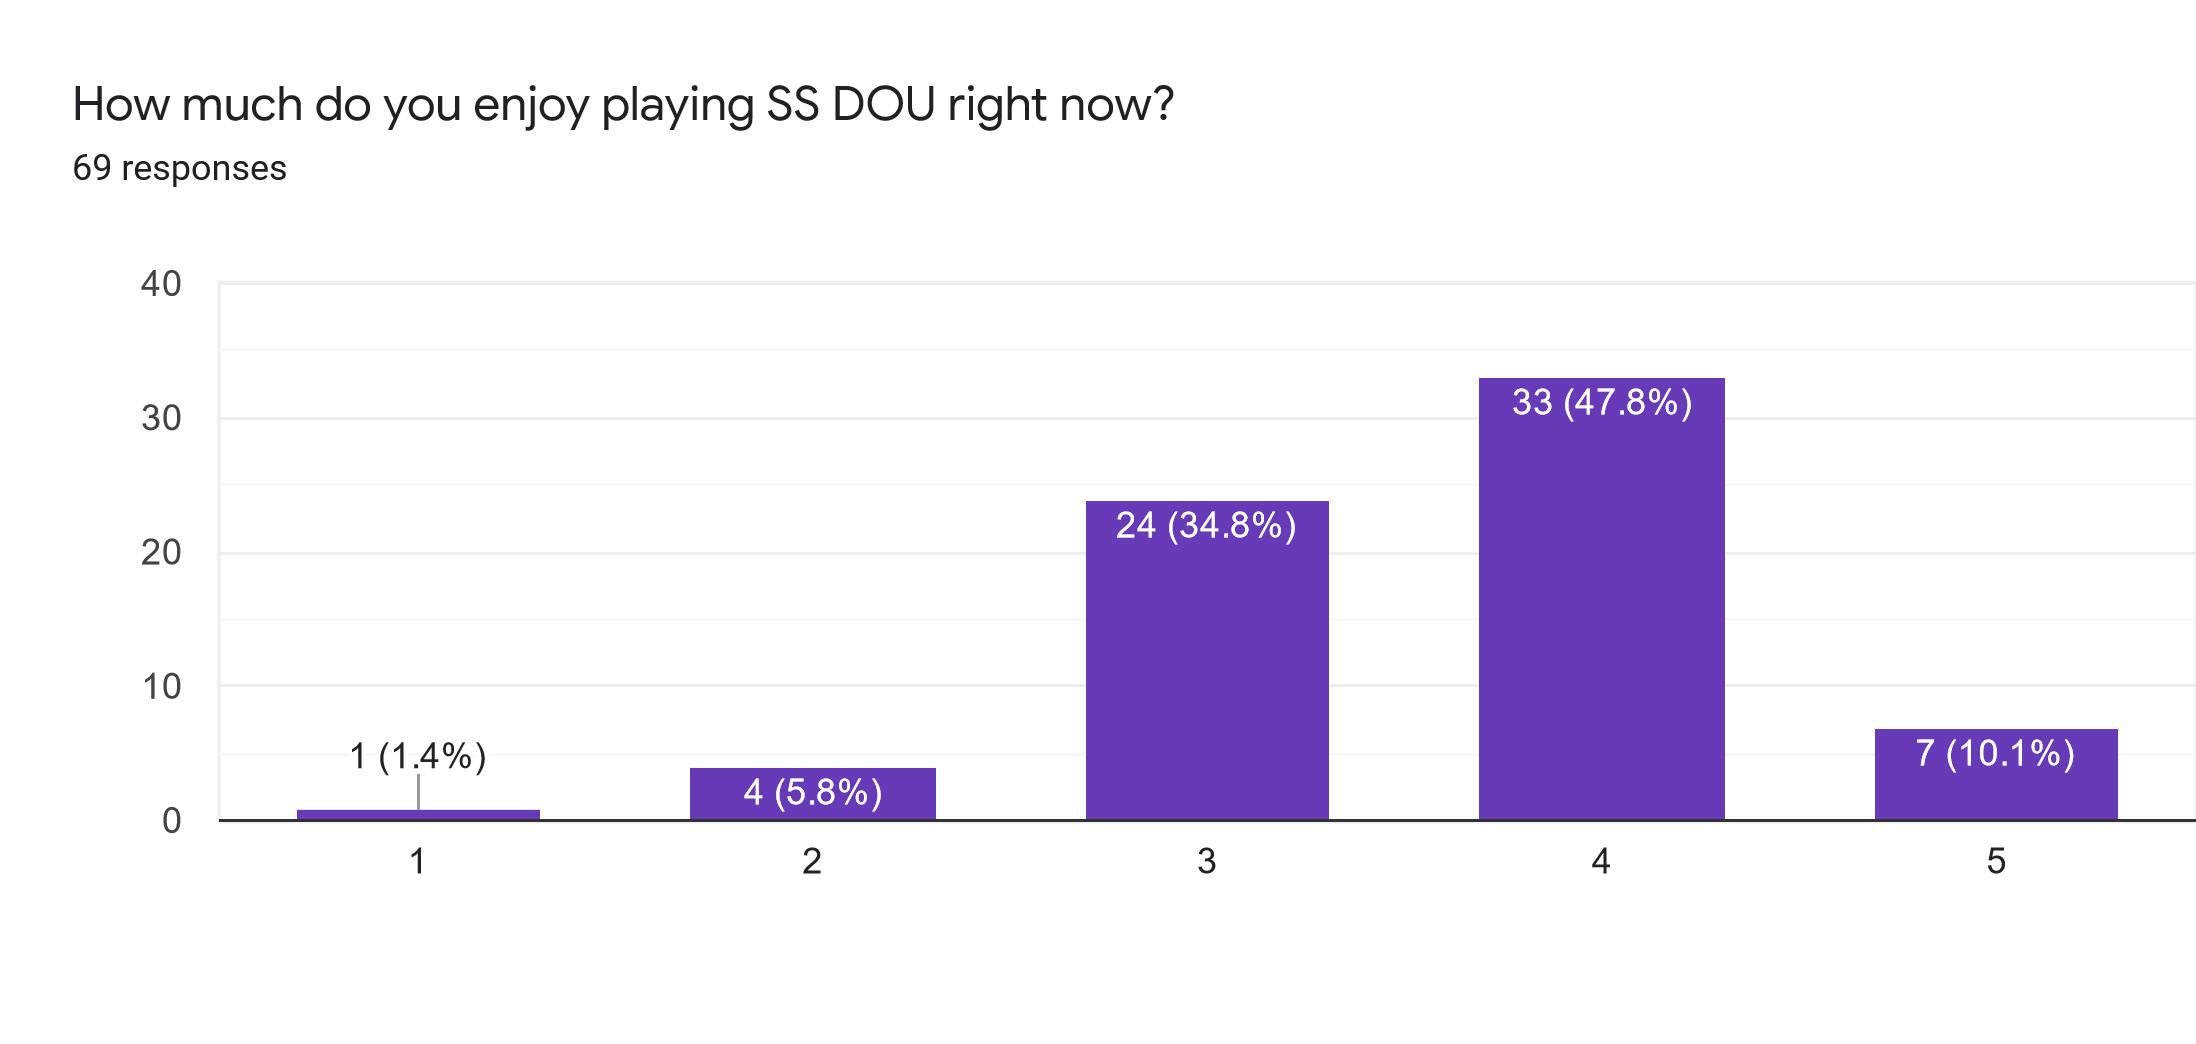 Forms response chart. Question title: How much do you enjoy playing SS DOU right now?. Number of responses: 69 responses.